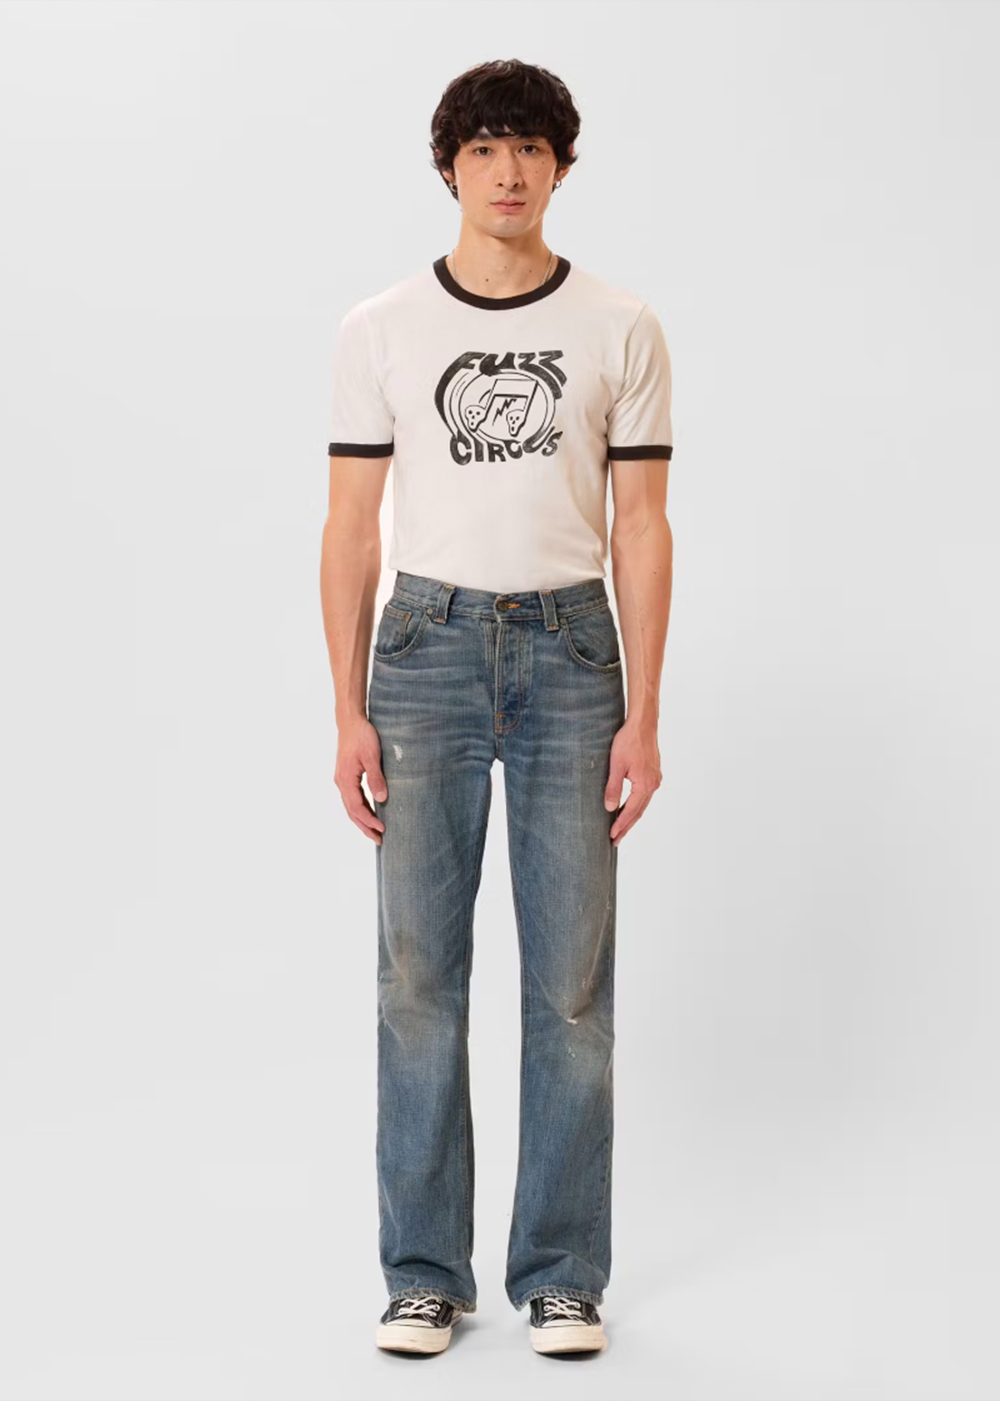 Ricky Fuzz Ringer T-Shirt - Off White - Nudie Jeans Canada - Danali